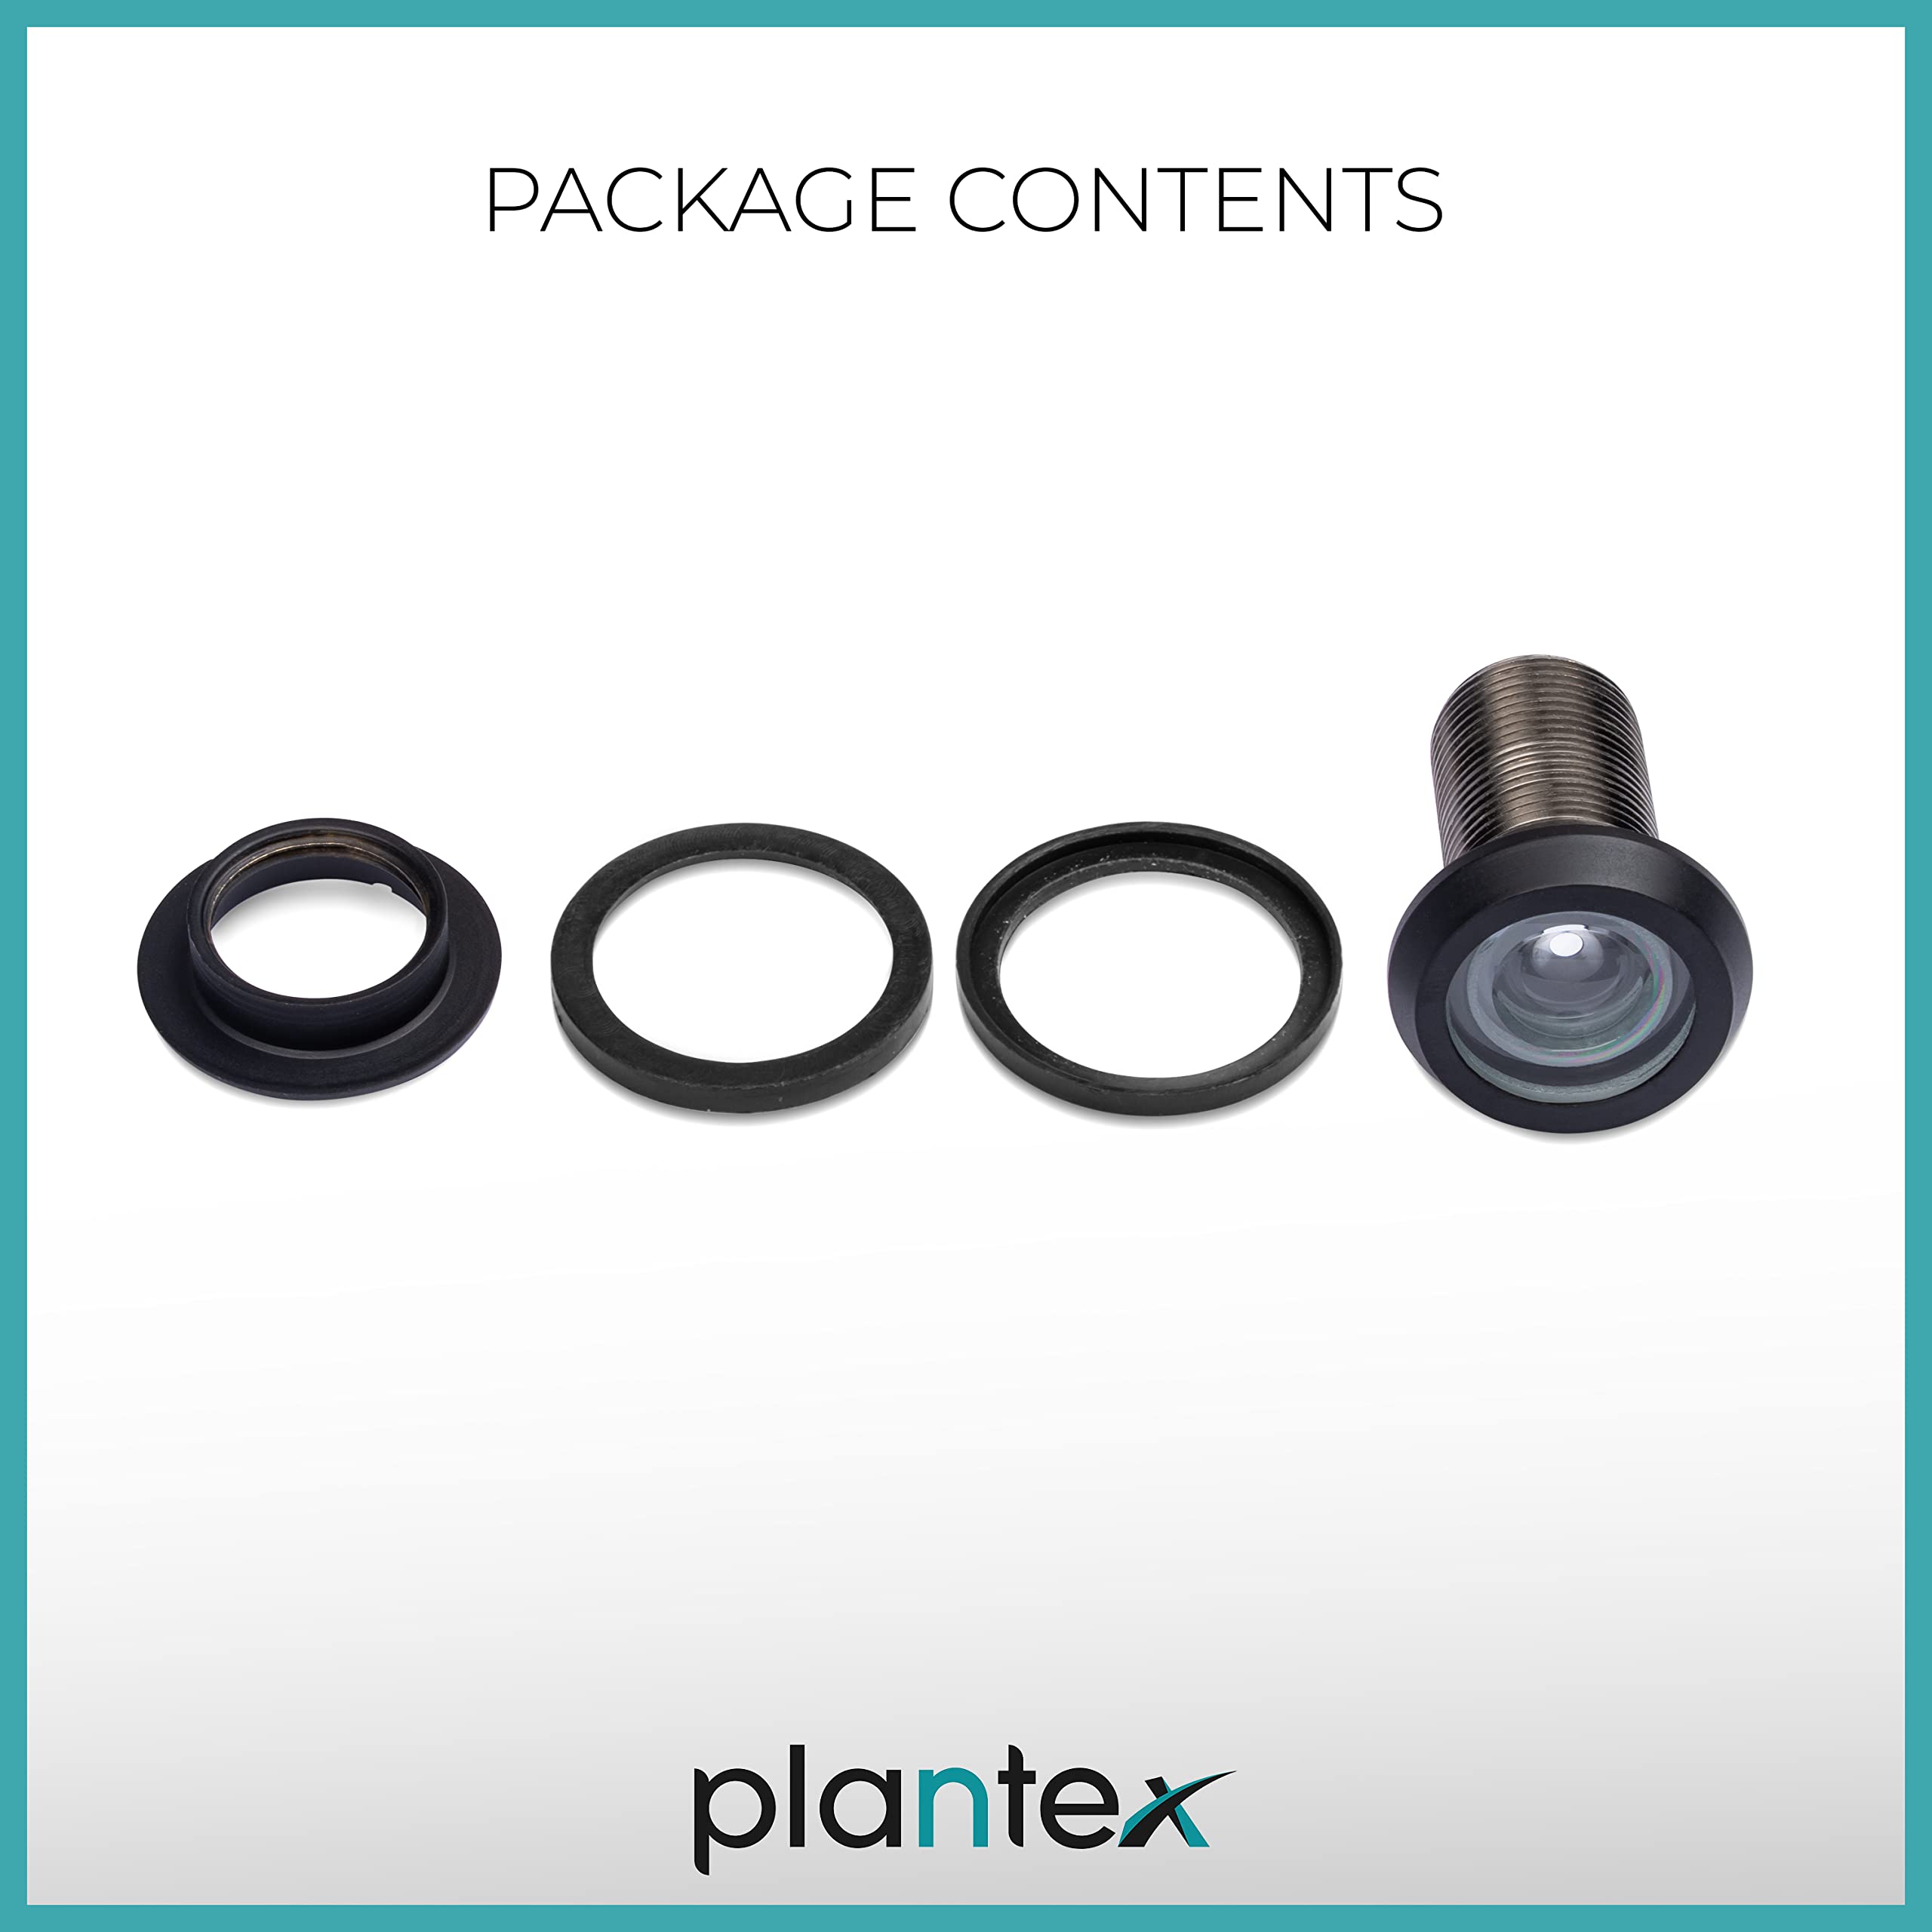 Plantex Door Eye viewer with 200 Degree Wide View for Peephole - Black (Pack of 4)